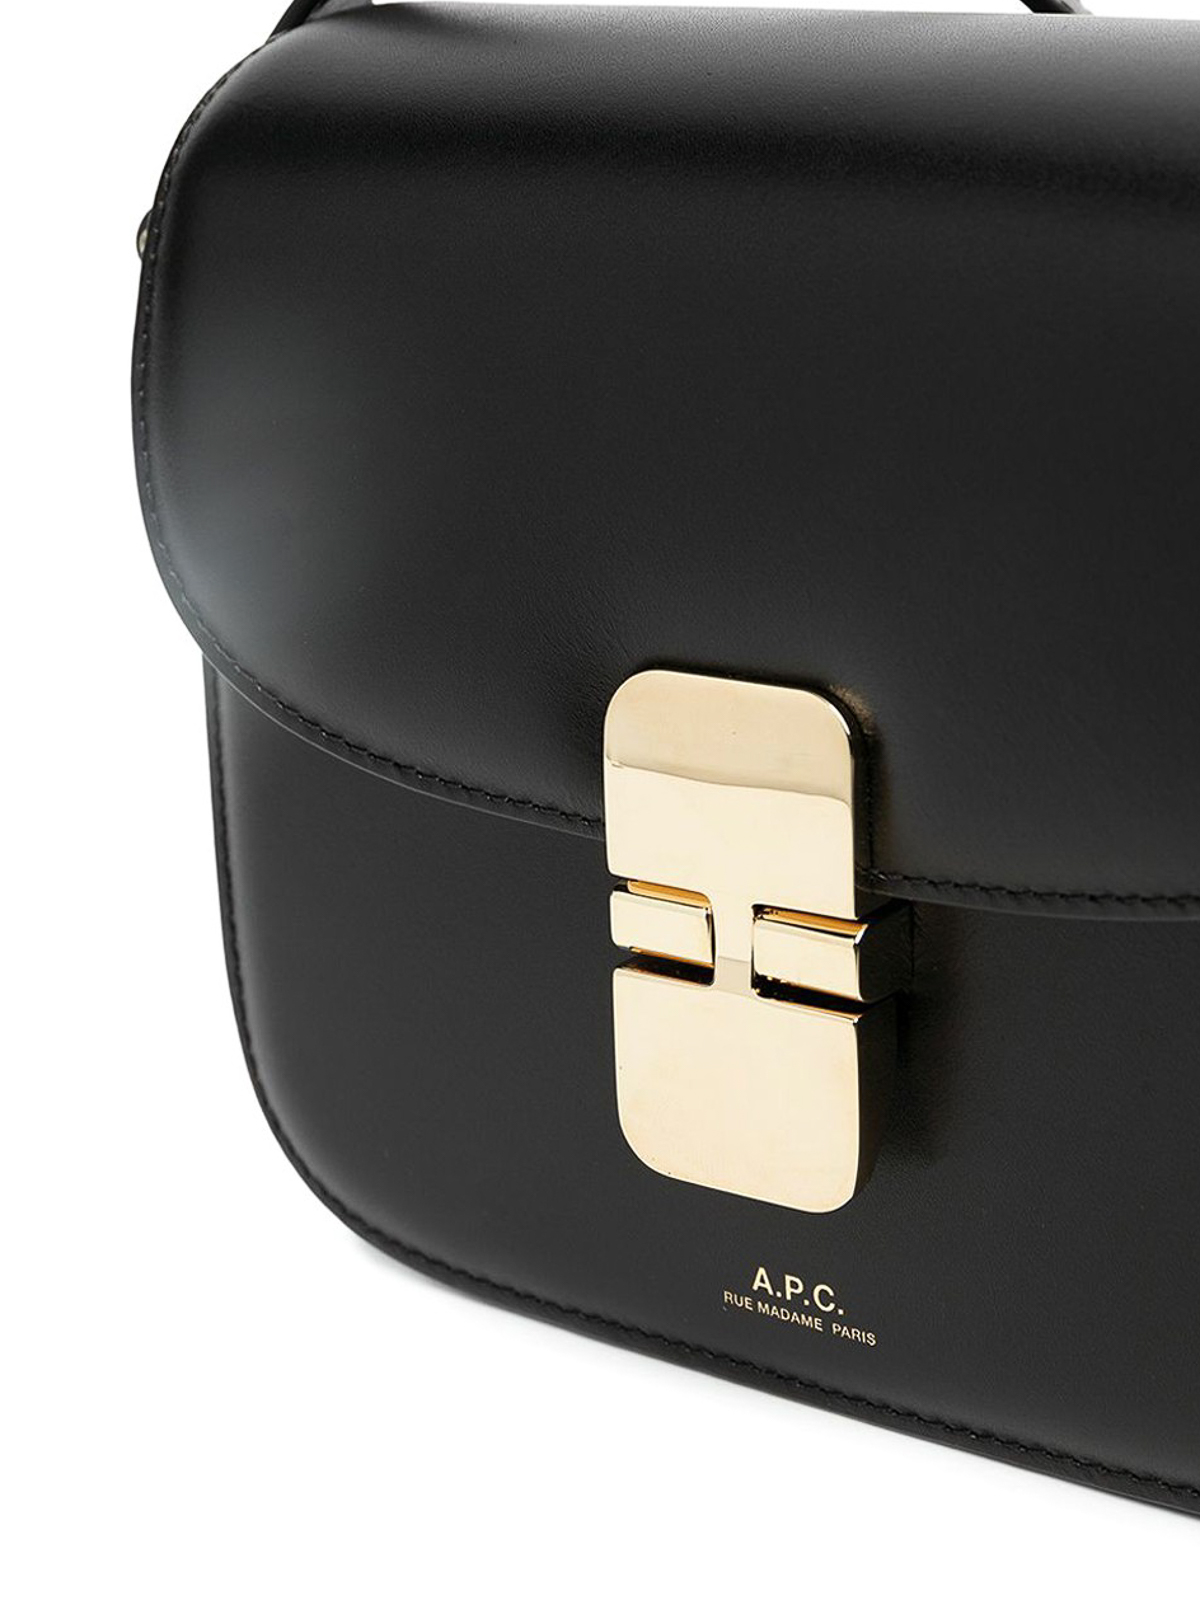 New A.p.c. APC grace small bag black Smooth Black Leather- JUST IN